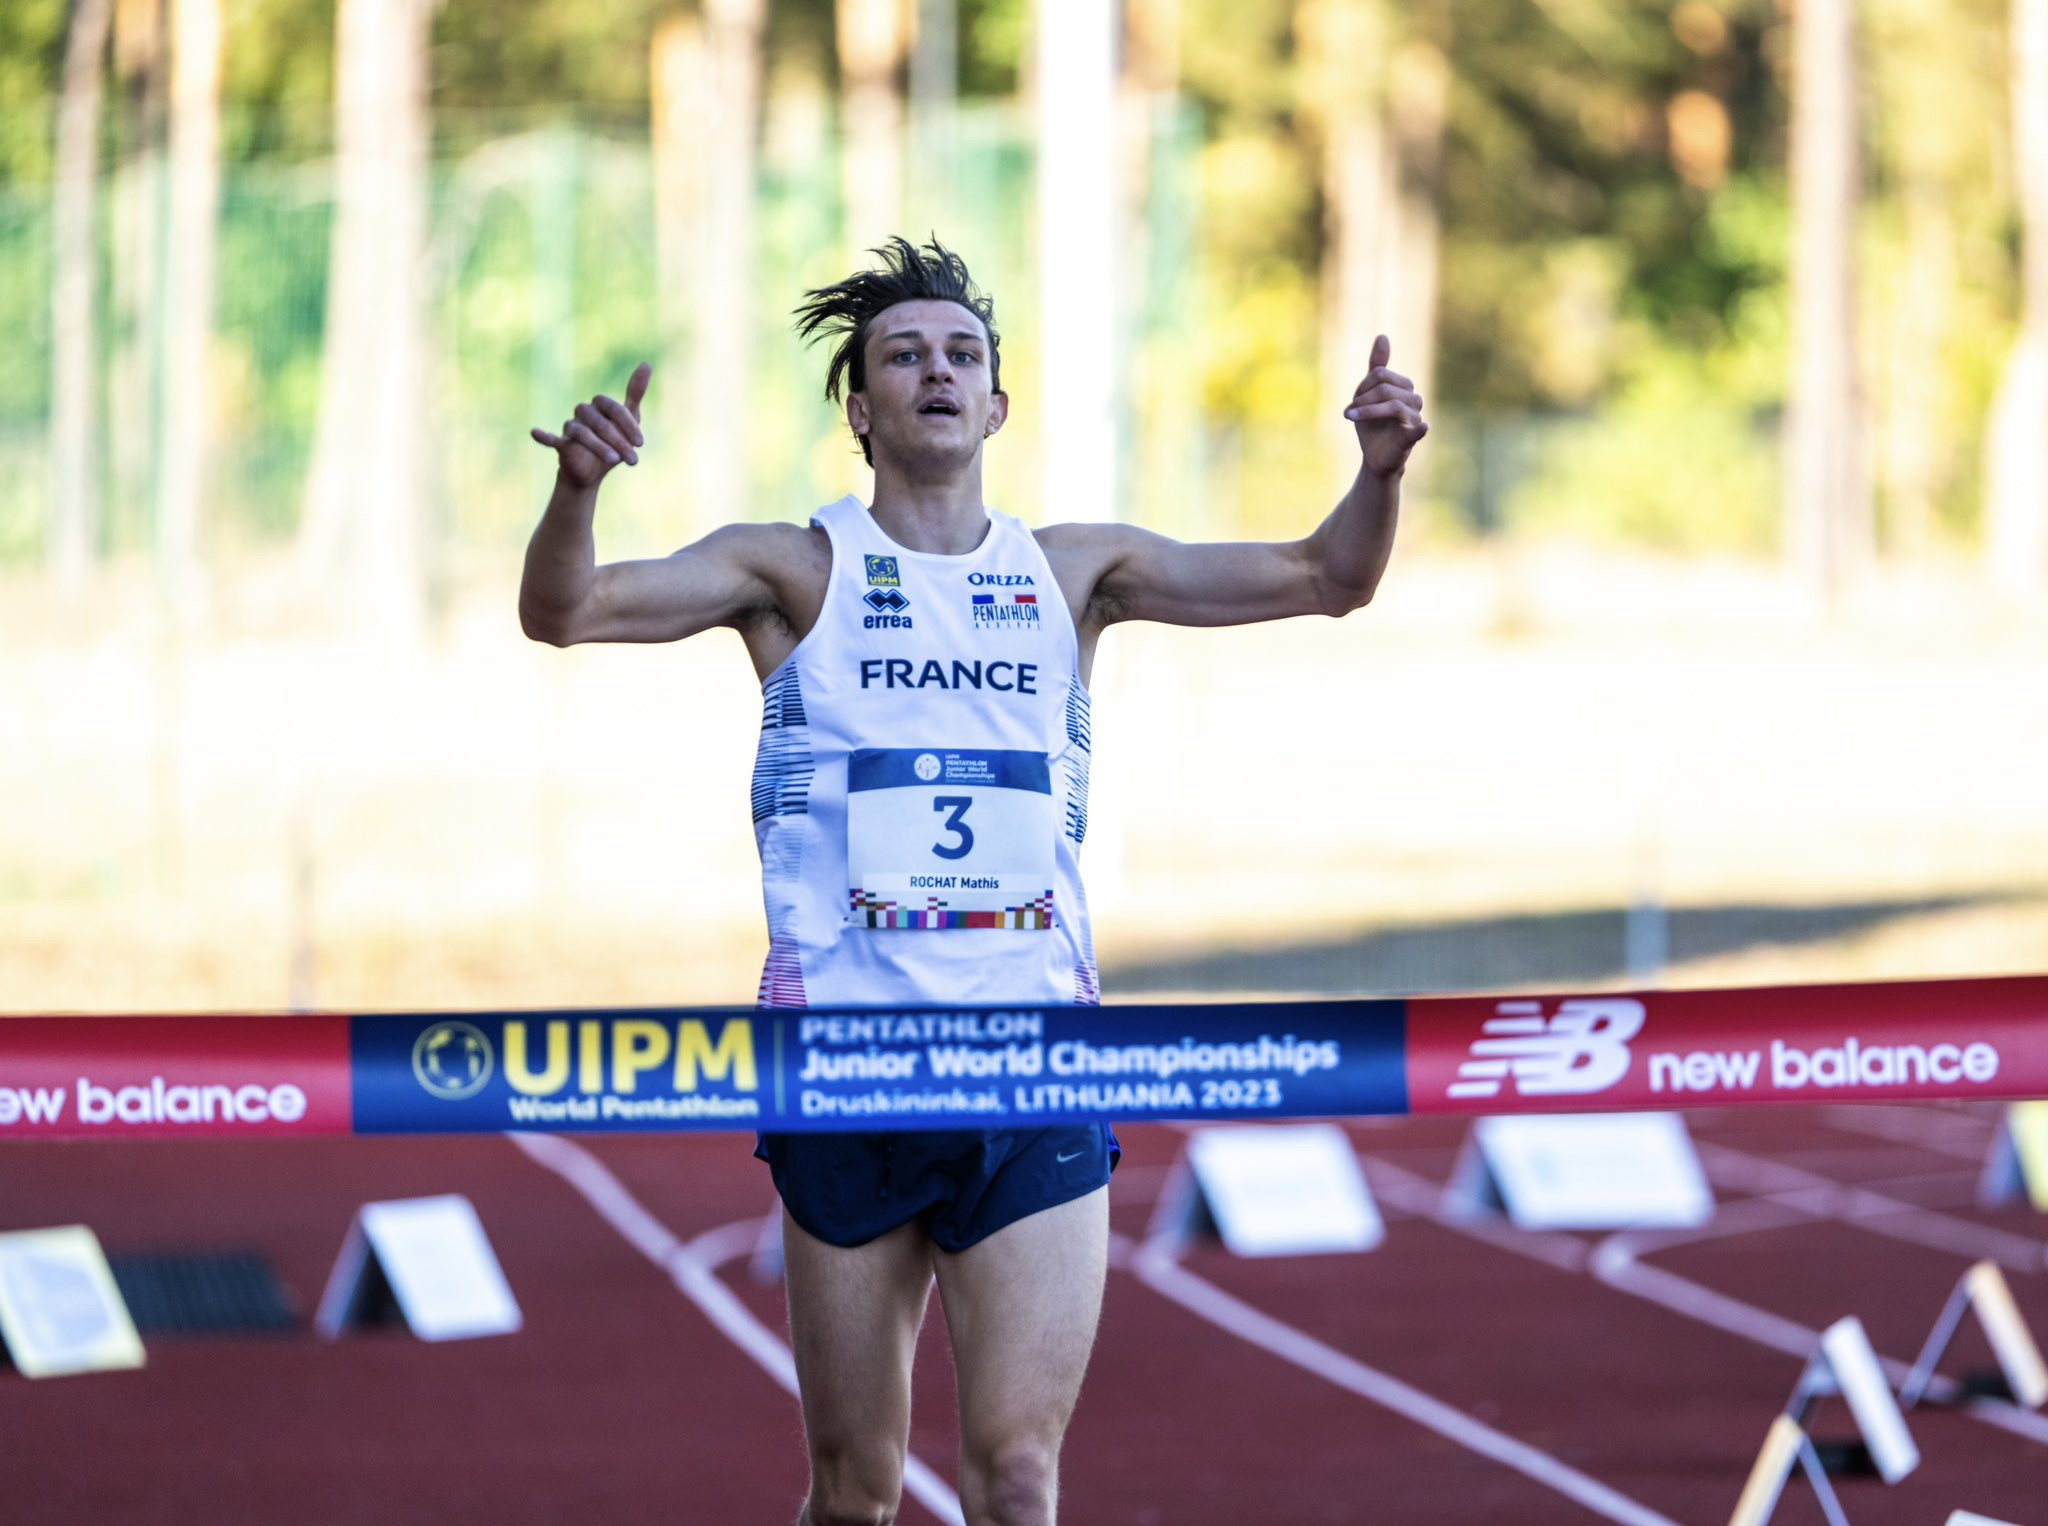 Mathis Rochat took the men's gold medal at the Pentathlon Junior World Championships in Lithuania ©UIPM